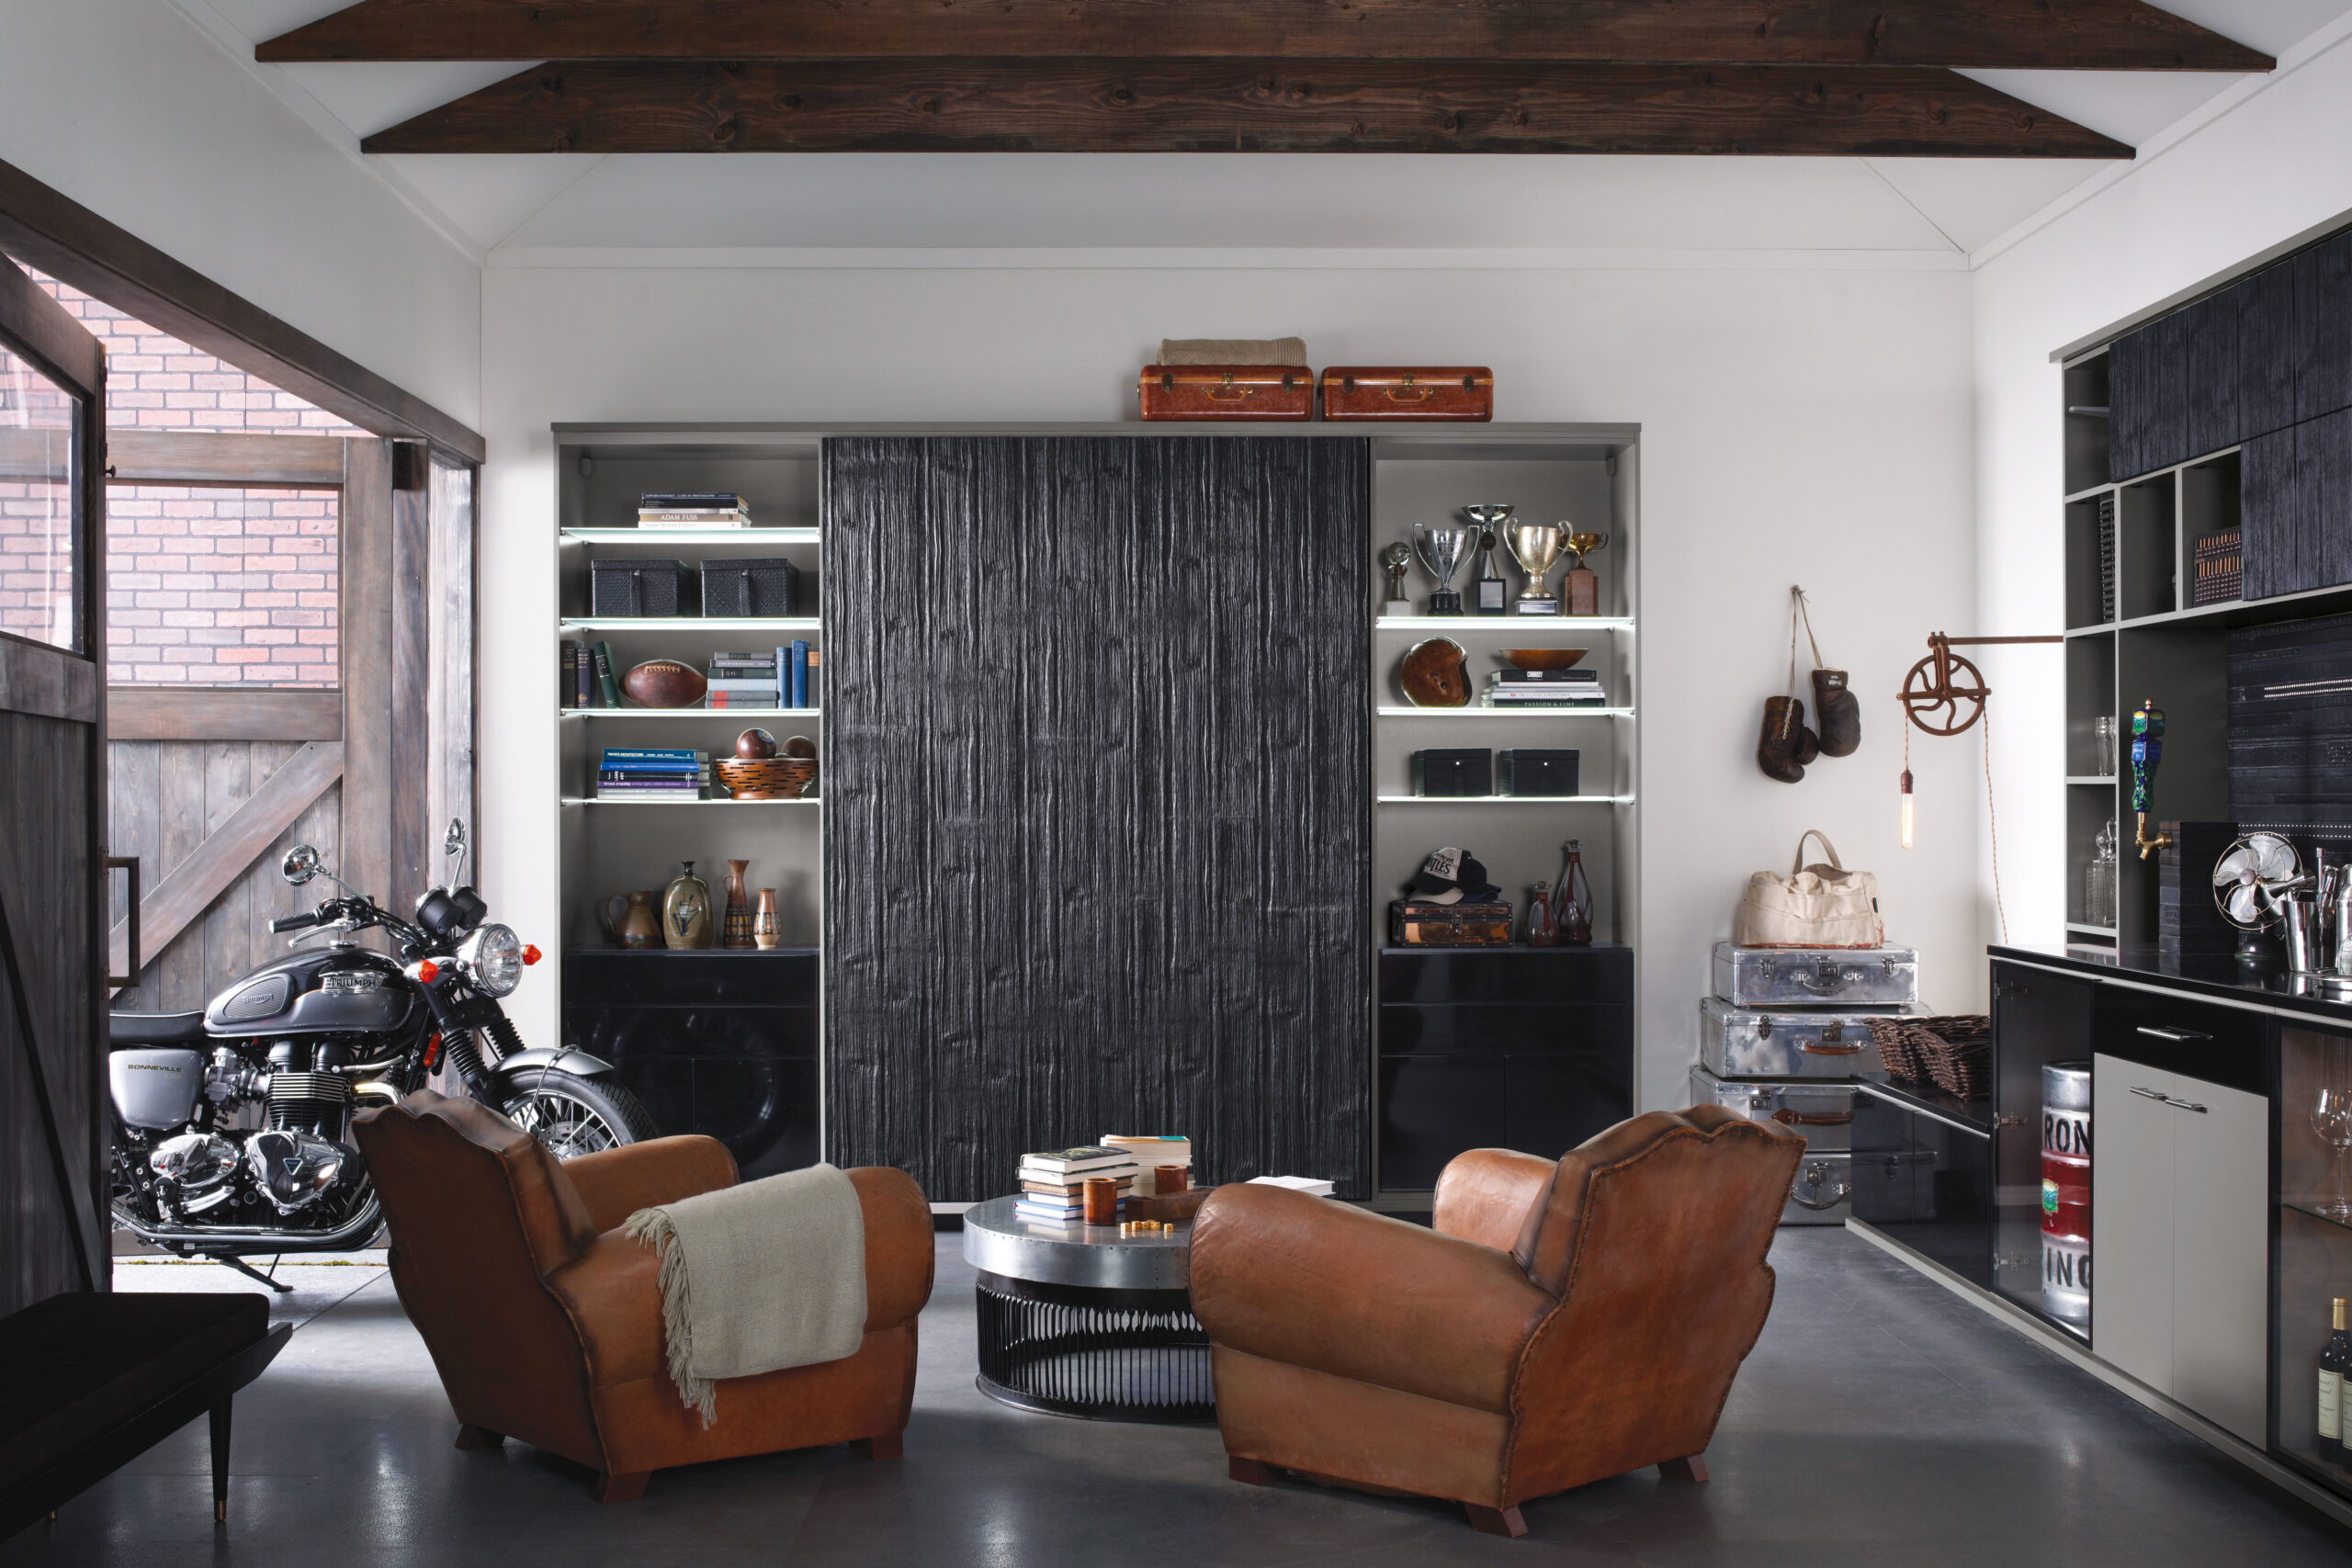 Garage repurposed to an entertainment center man cave space with custom storage, lighting and home bar by California Closets